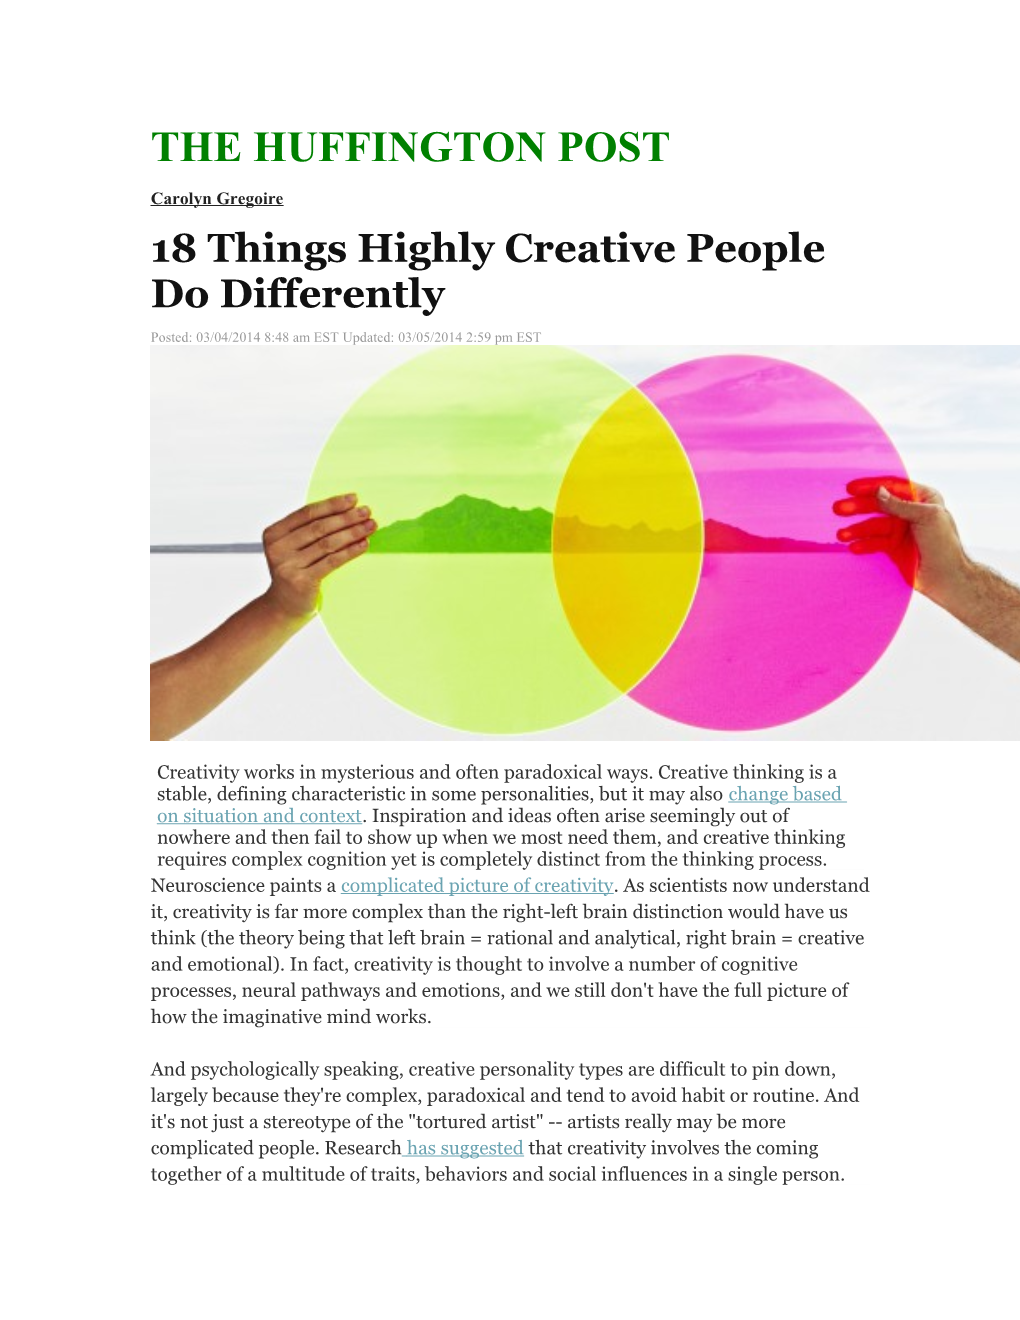 18 Things Highly Creative People Do Differently